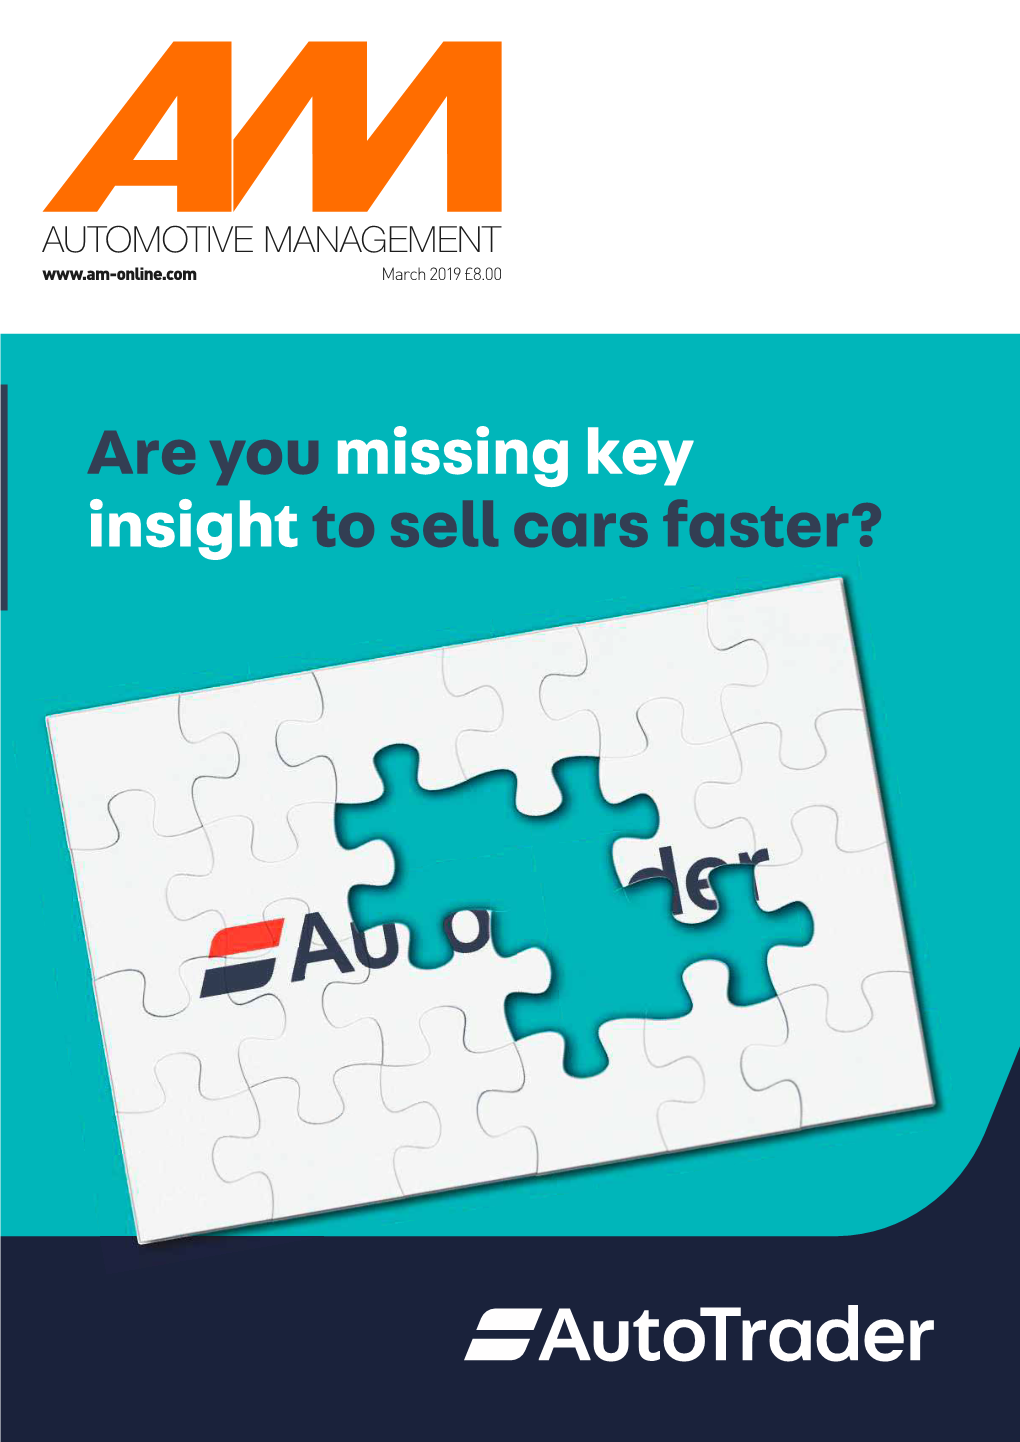 Are You Missing Key Insightto Sell Cars Faster?